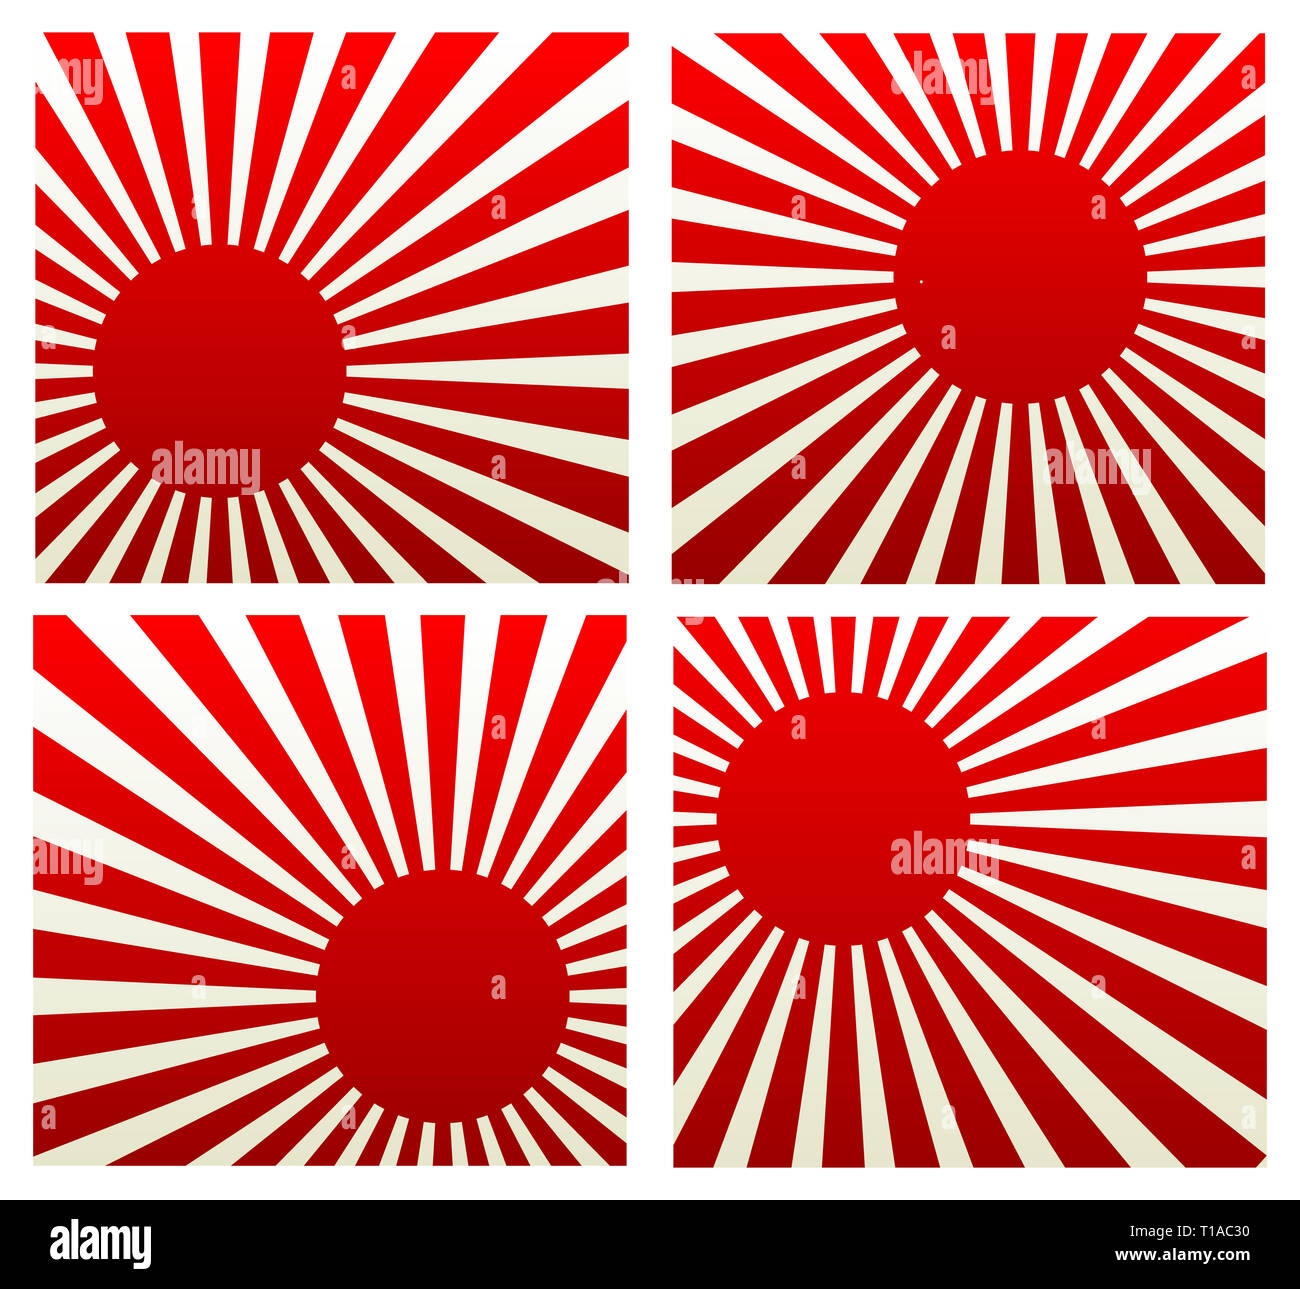 Circle, rays and they are red, white. Vector Stock Photo